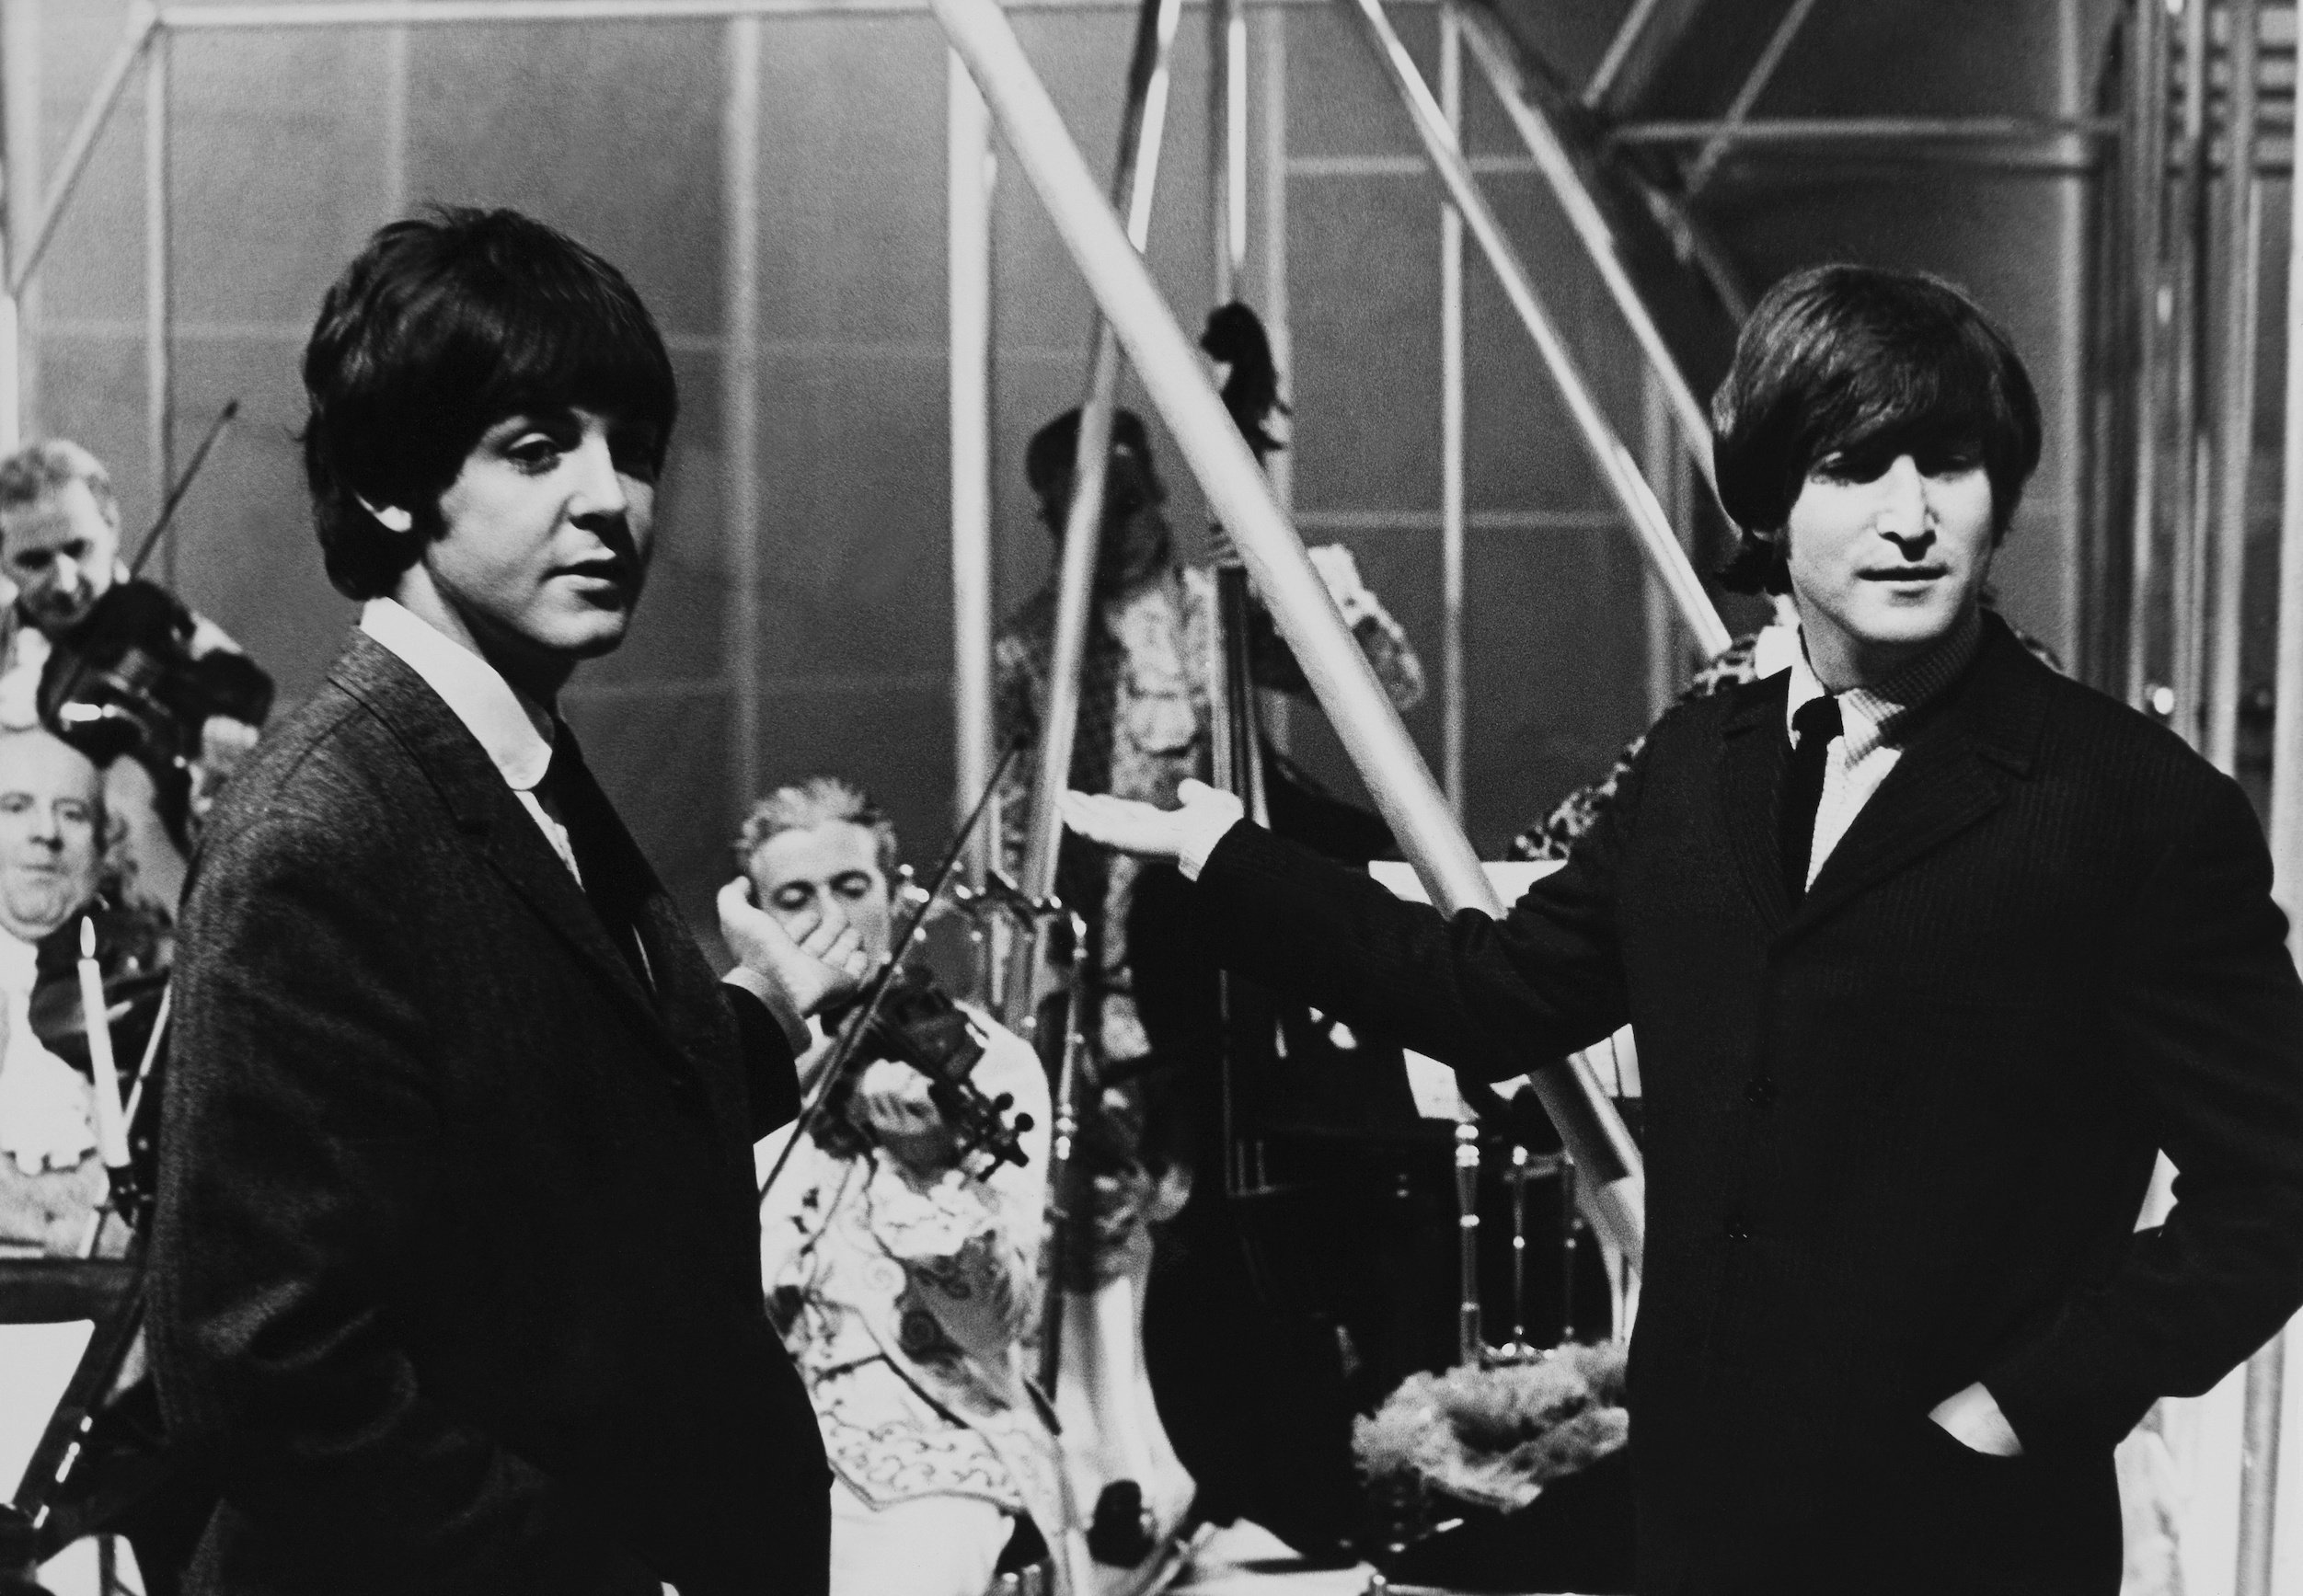 Paul McCartney and John Lennon of The Beatles present Fritz Spiegel and his band at Manchester in England